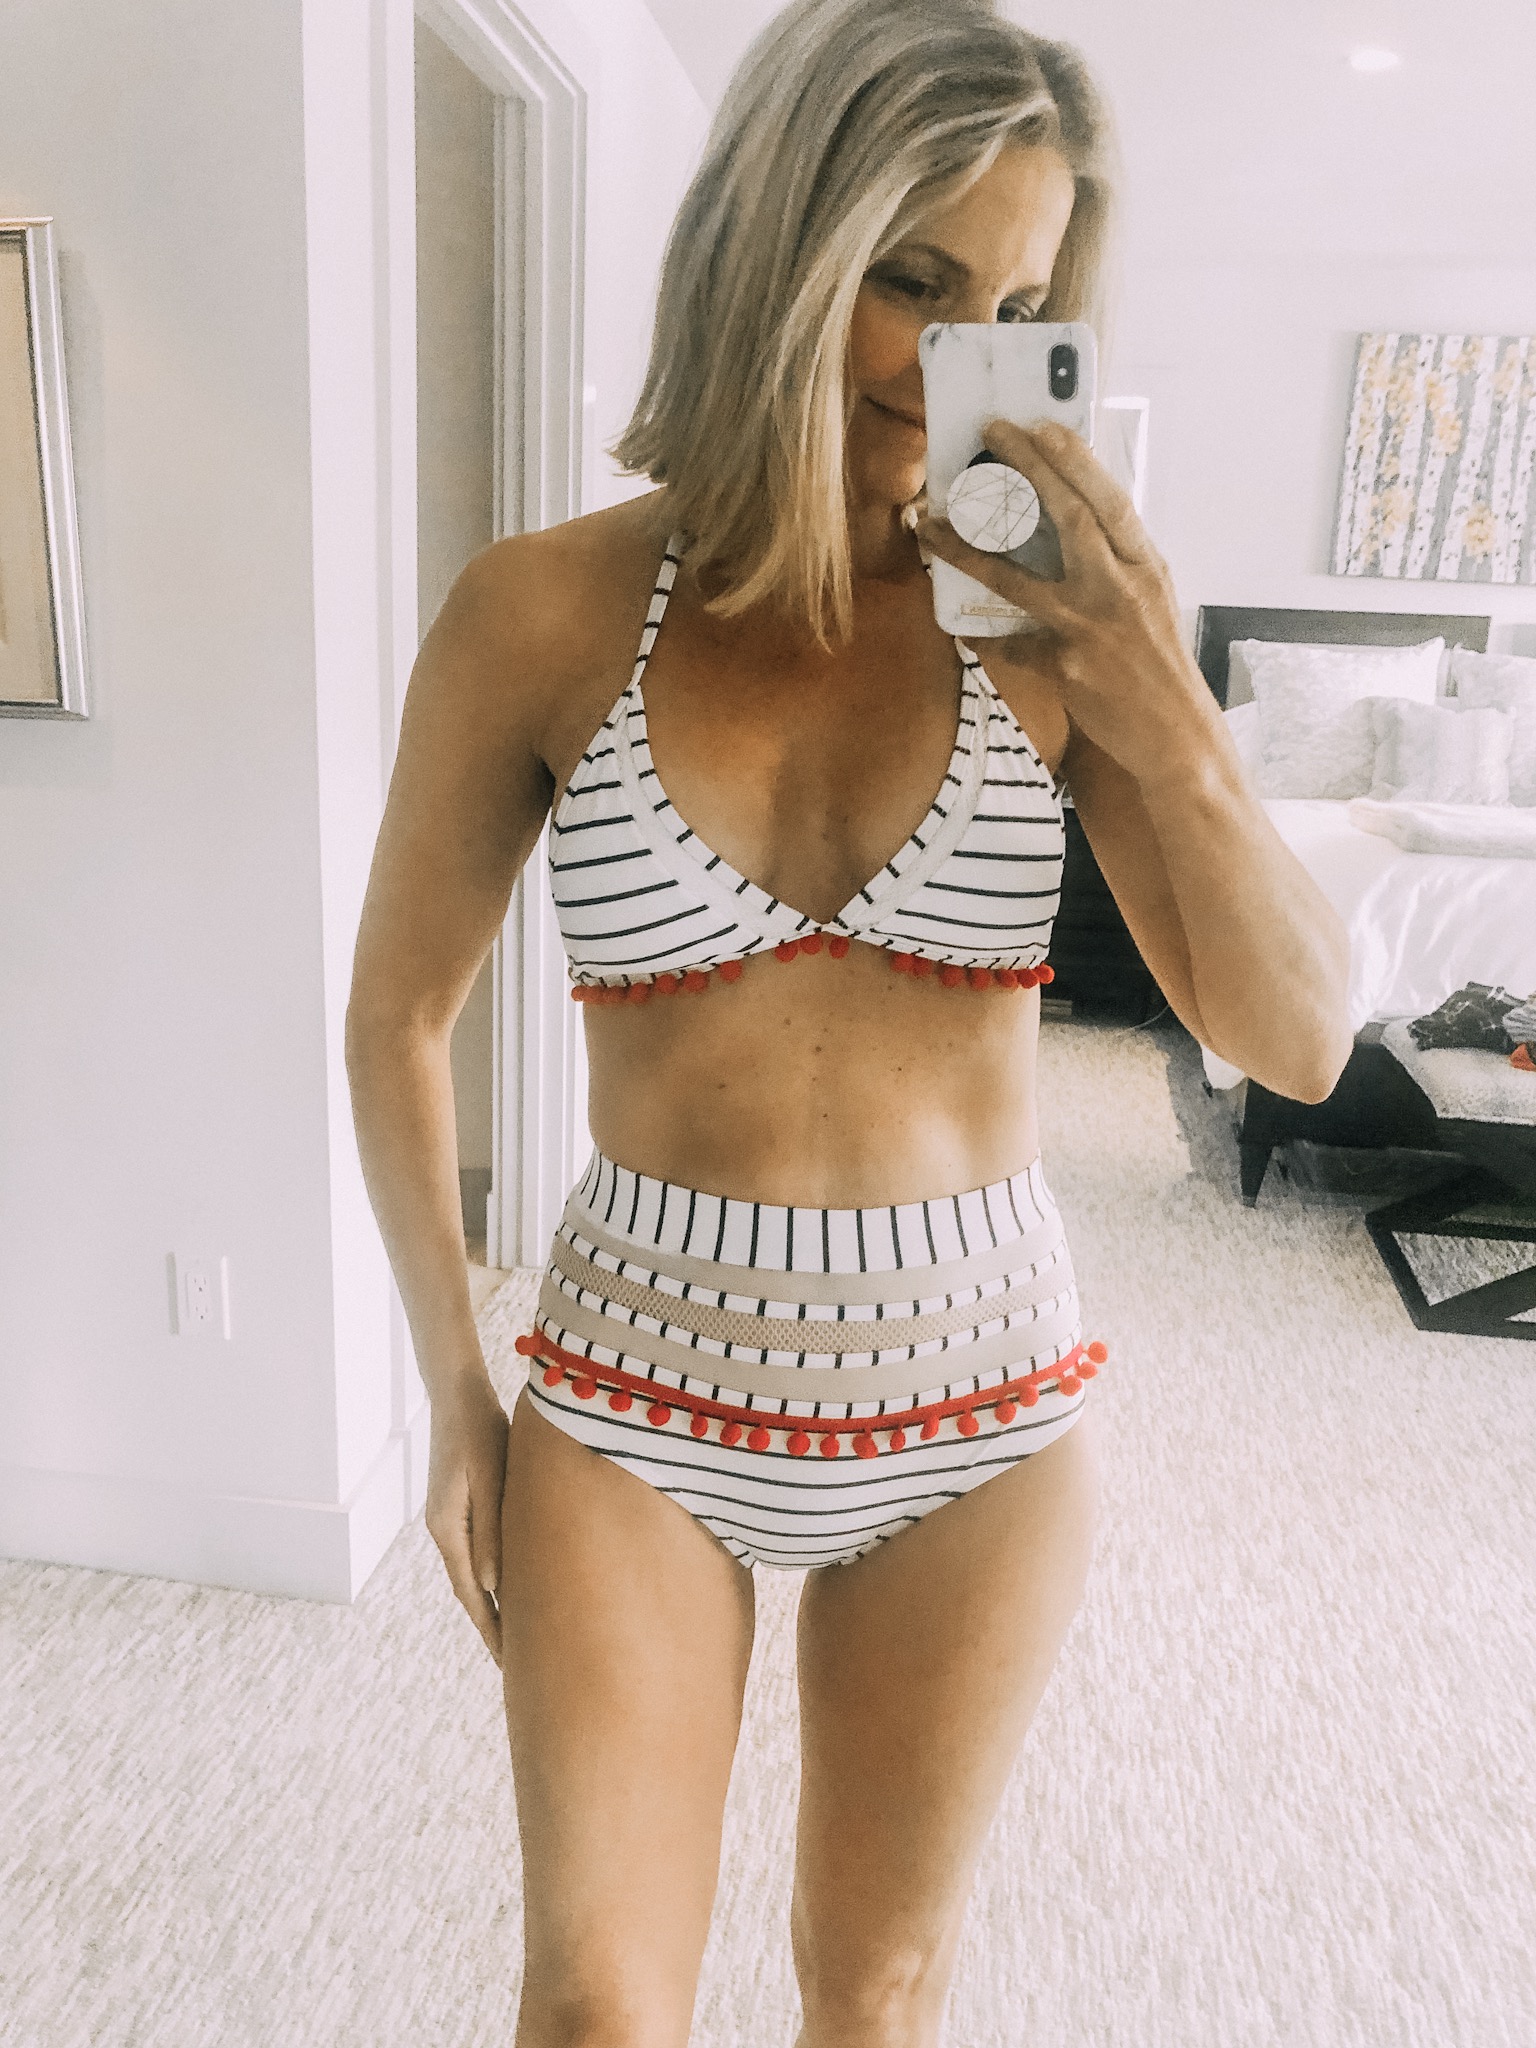 Affordable Swimwear featuring an amazing Amazon suit for only $25 that looks like Tularosa swimsuit on fashion blogger Erin Busbee of Busbeestyle.com